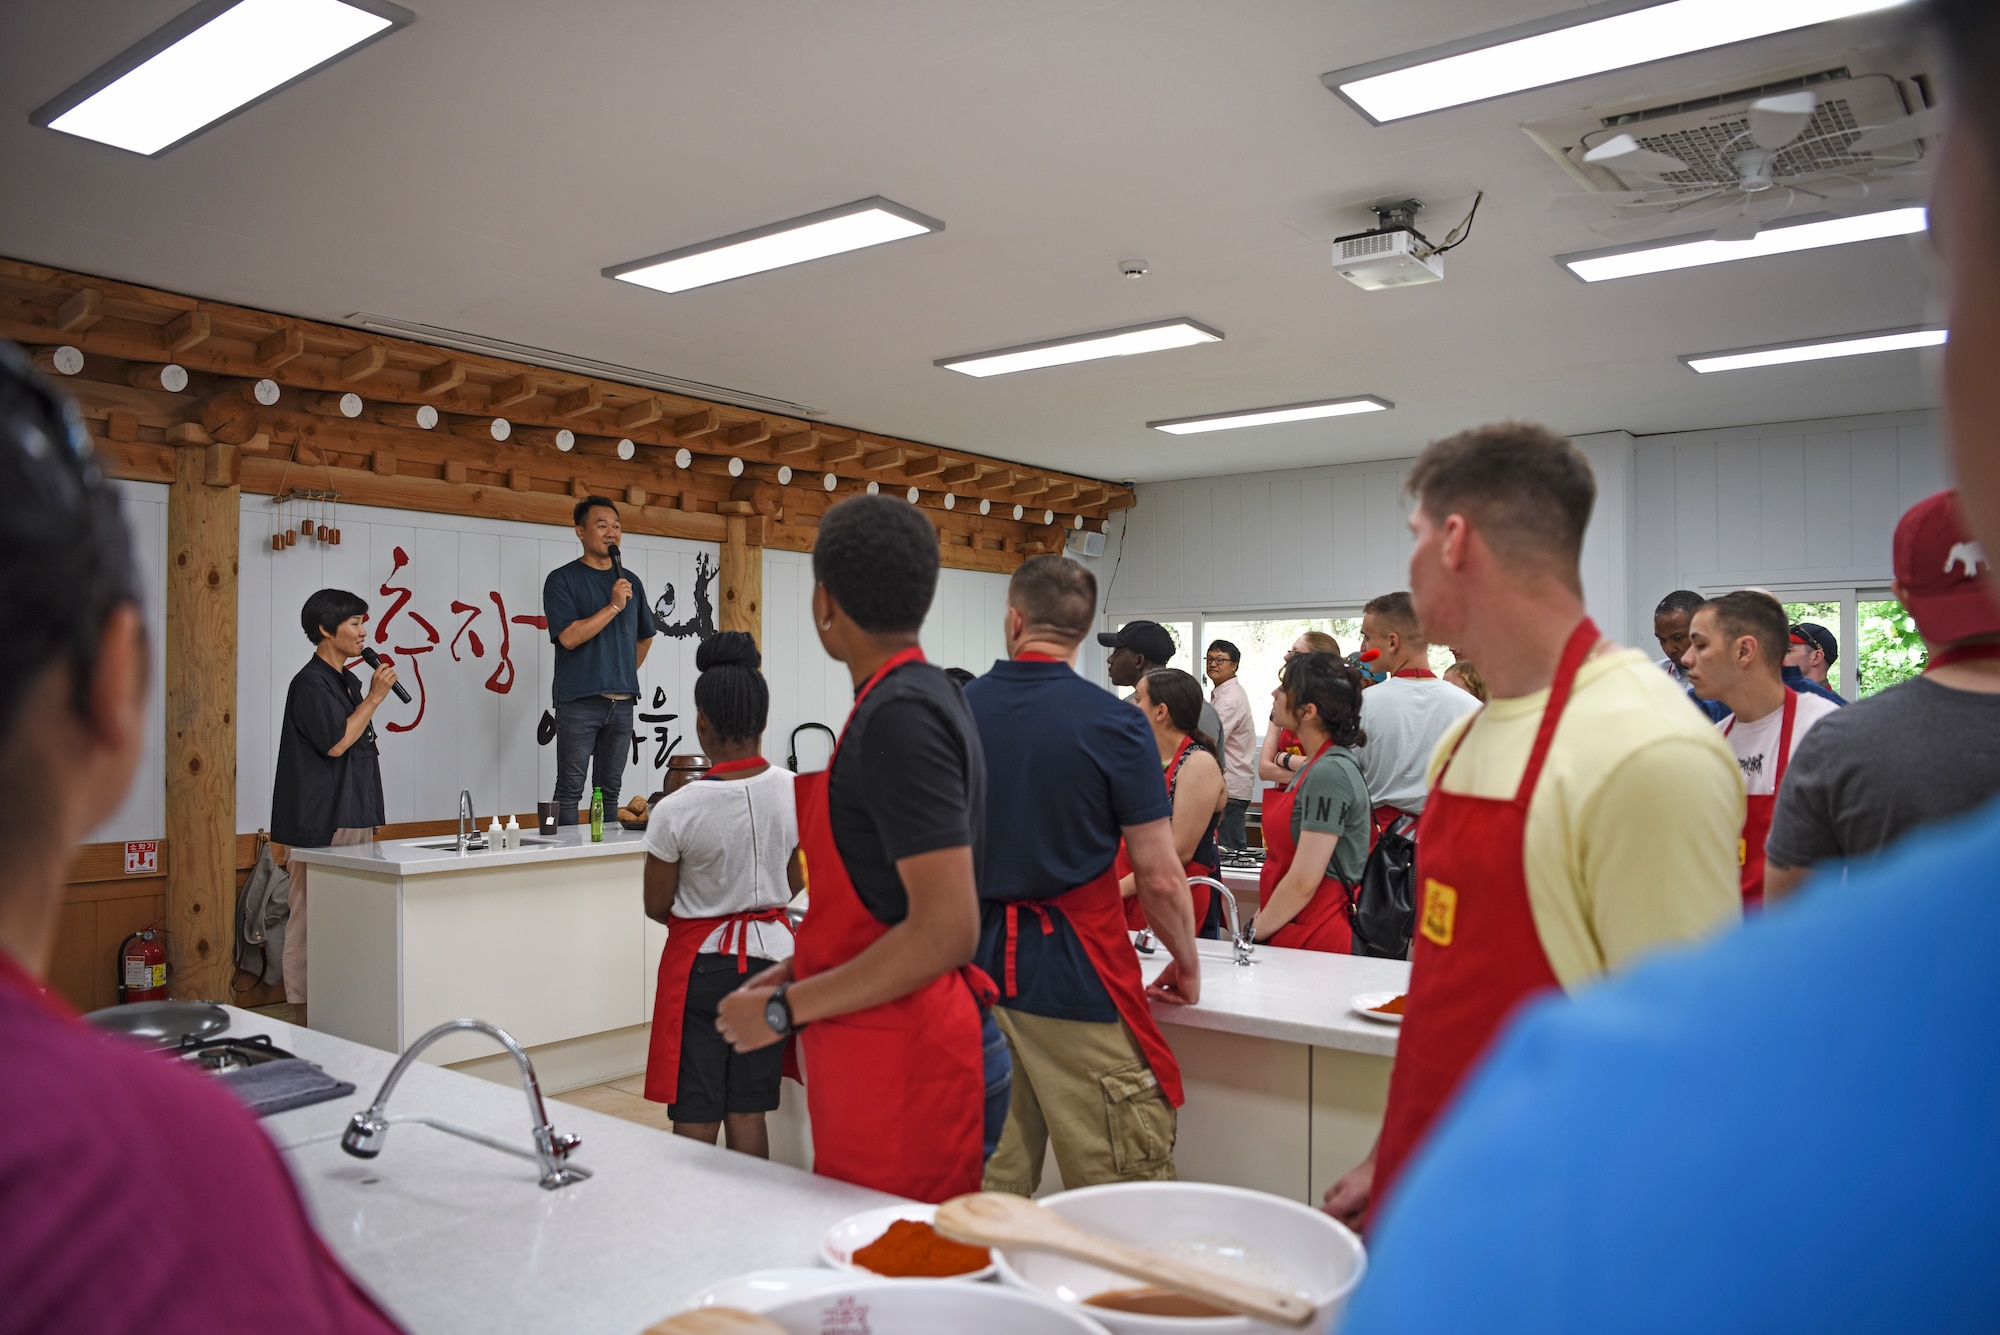 More than 50 U.S. service members prepare to cook chili paste and tokbokki, a Korean street food dish made of rice cakes, fish cakes, vegetables, chili paste and broth., during a tour at Sunchang Gochujang village, Republic of Korea, July 9, 2019. The service members received hands-on training from expert chili paste crafters on creating the Korean favorite. (U.S. Air Force photo by Staff Sgt. Mackenzie Mendez)